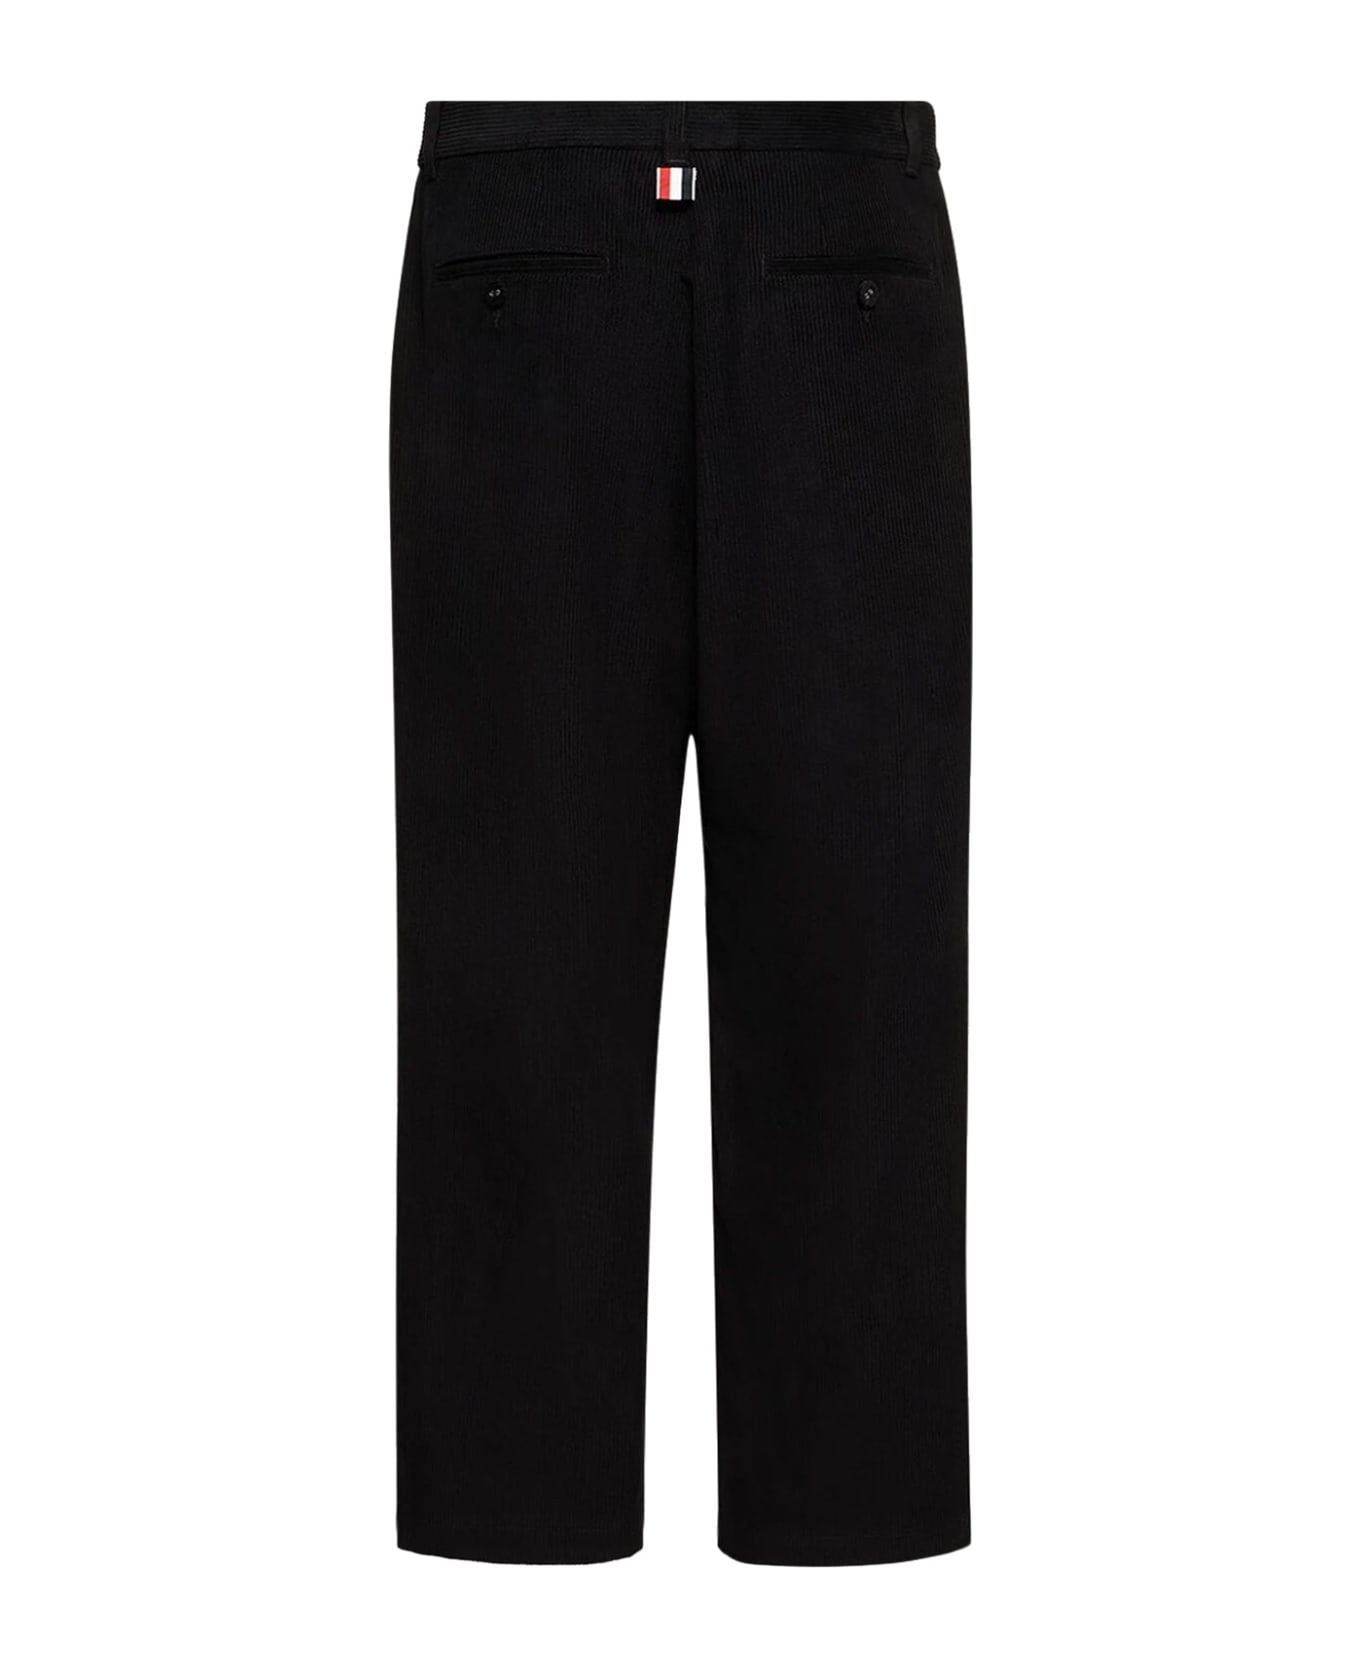 Thom Browne 'unconstructed In Corduroy' Cotton Pants - Black ボトムス